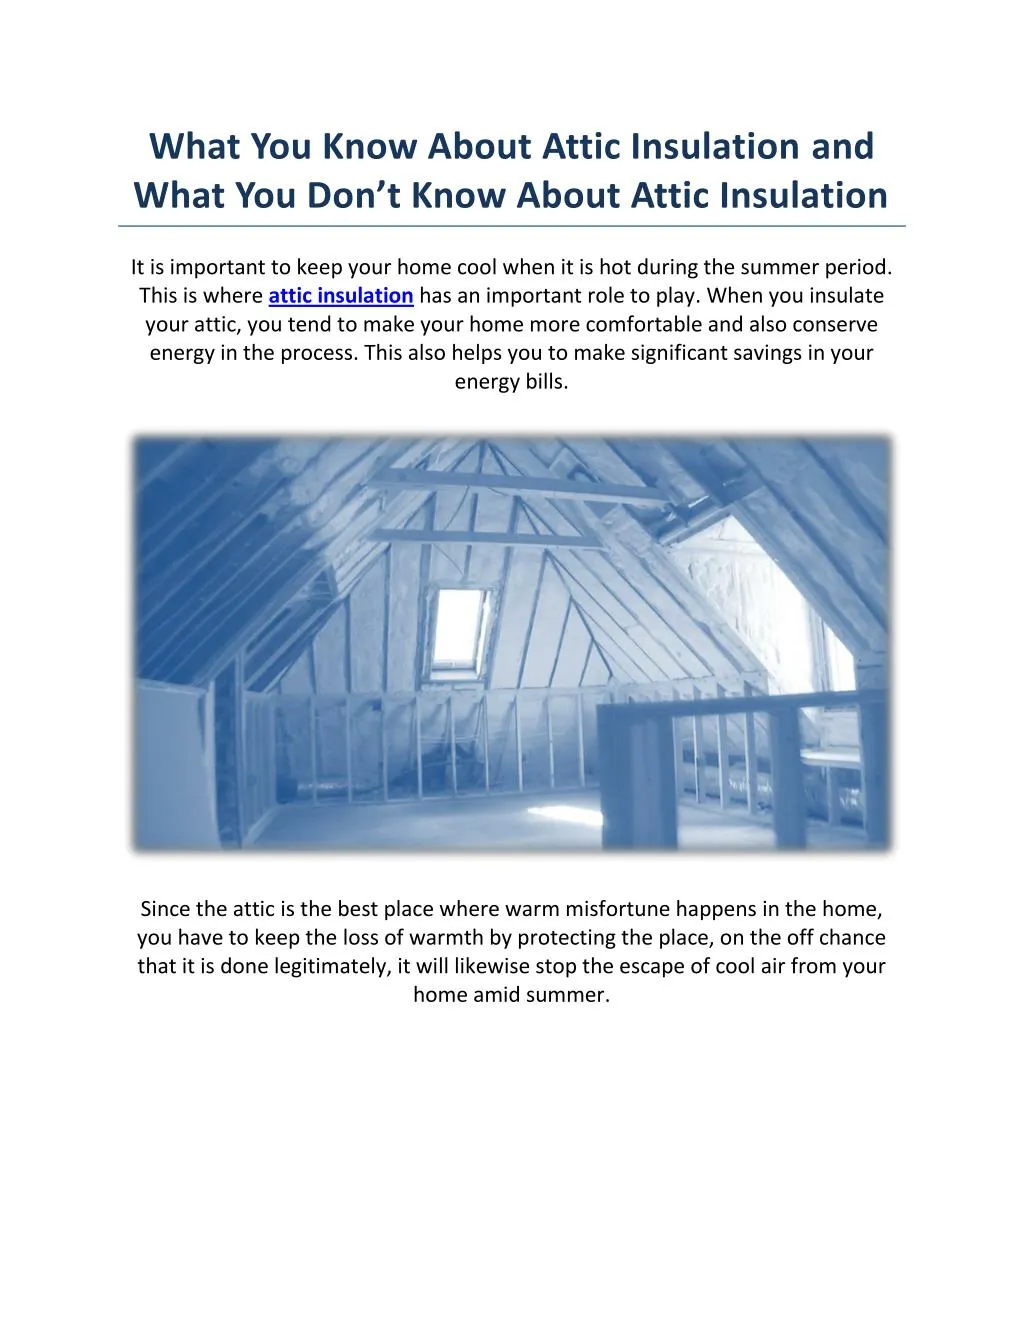 what you know about attic insulation and what